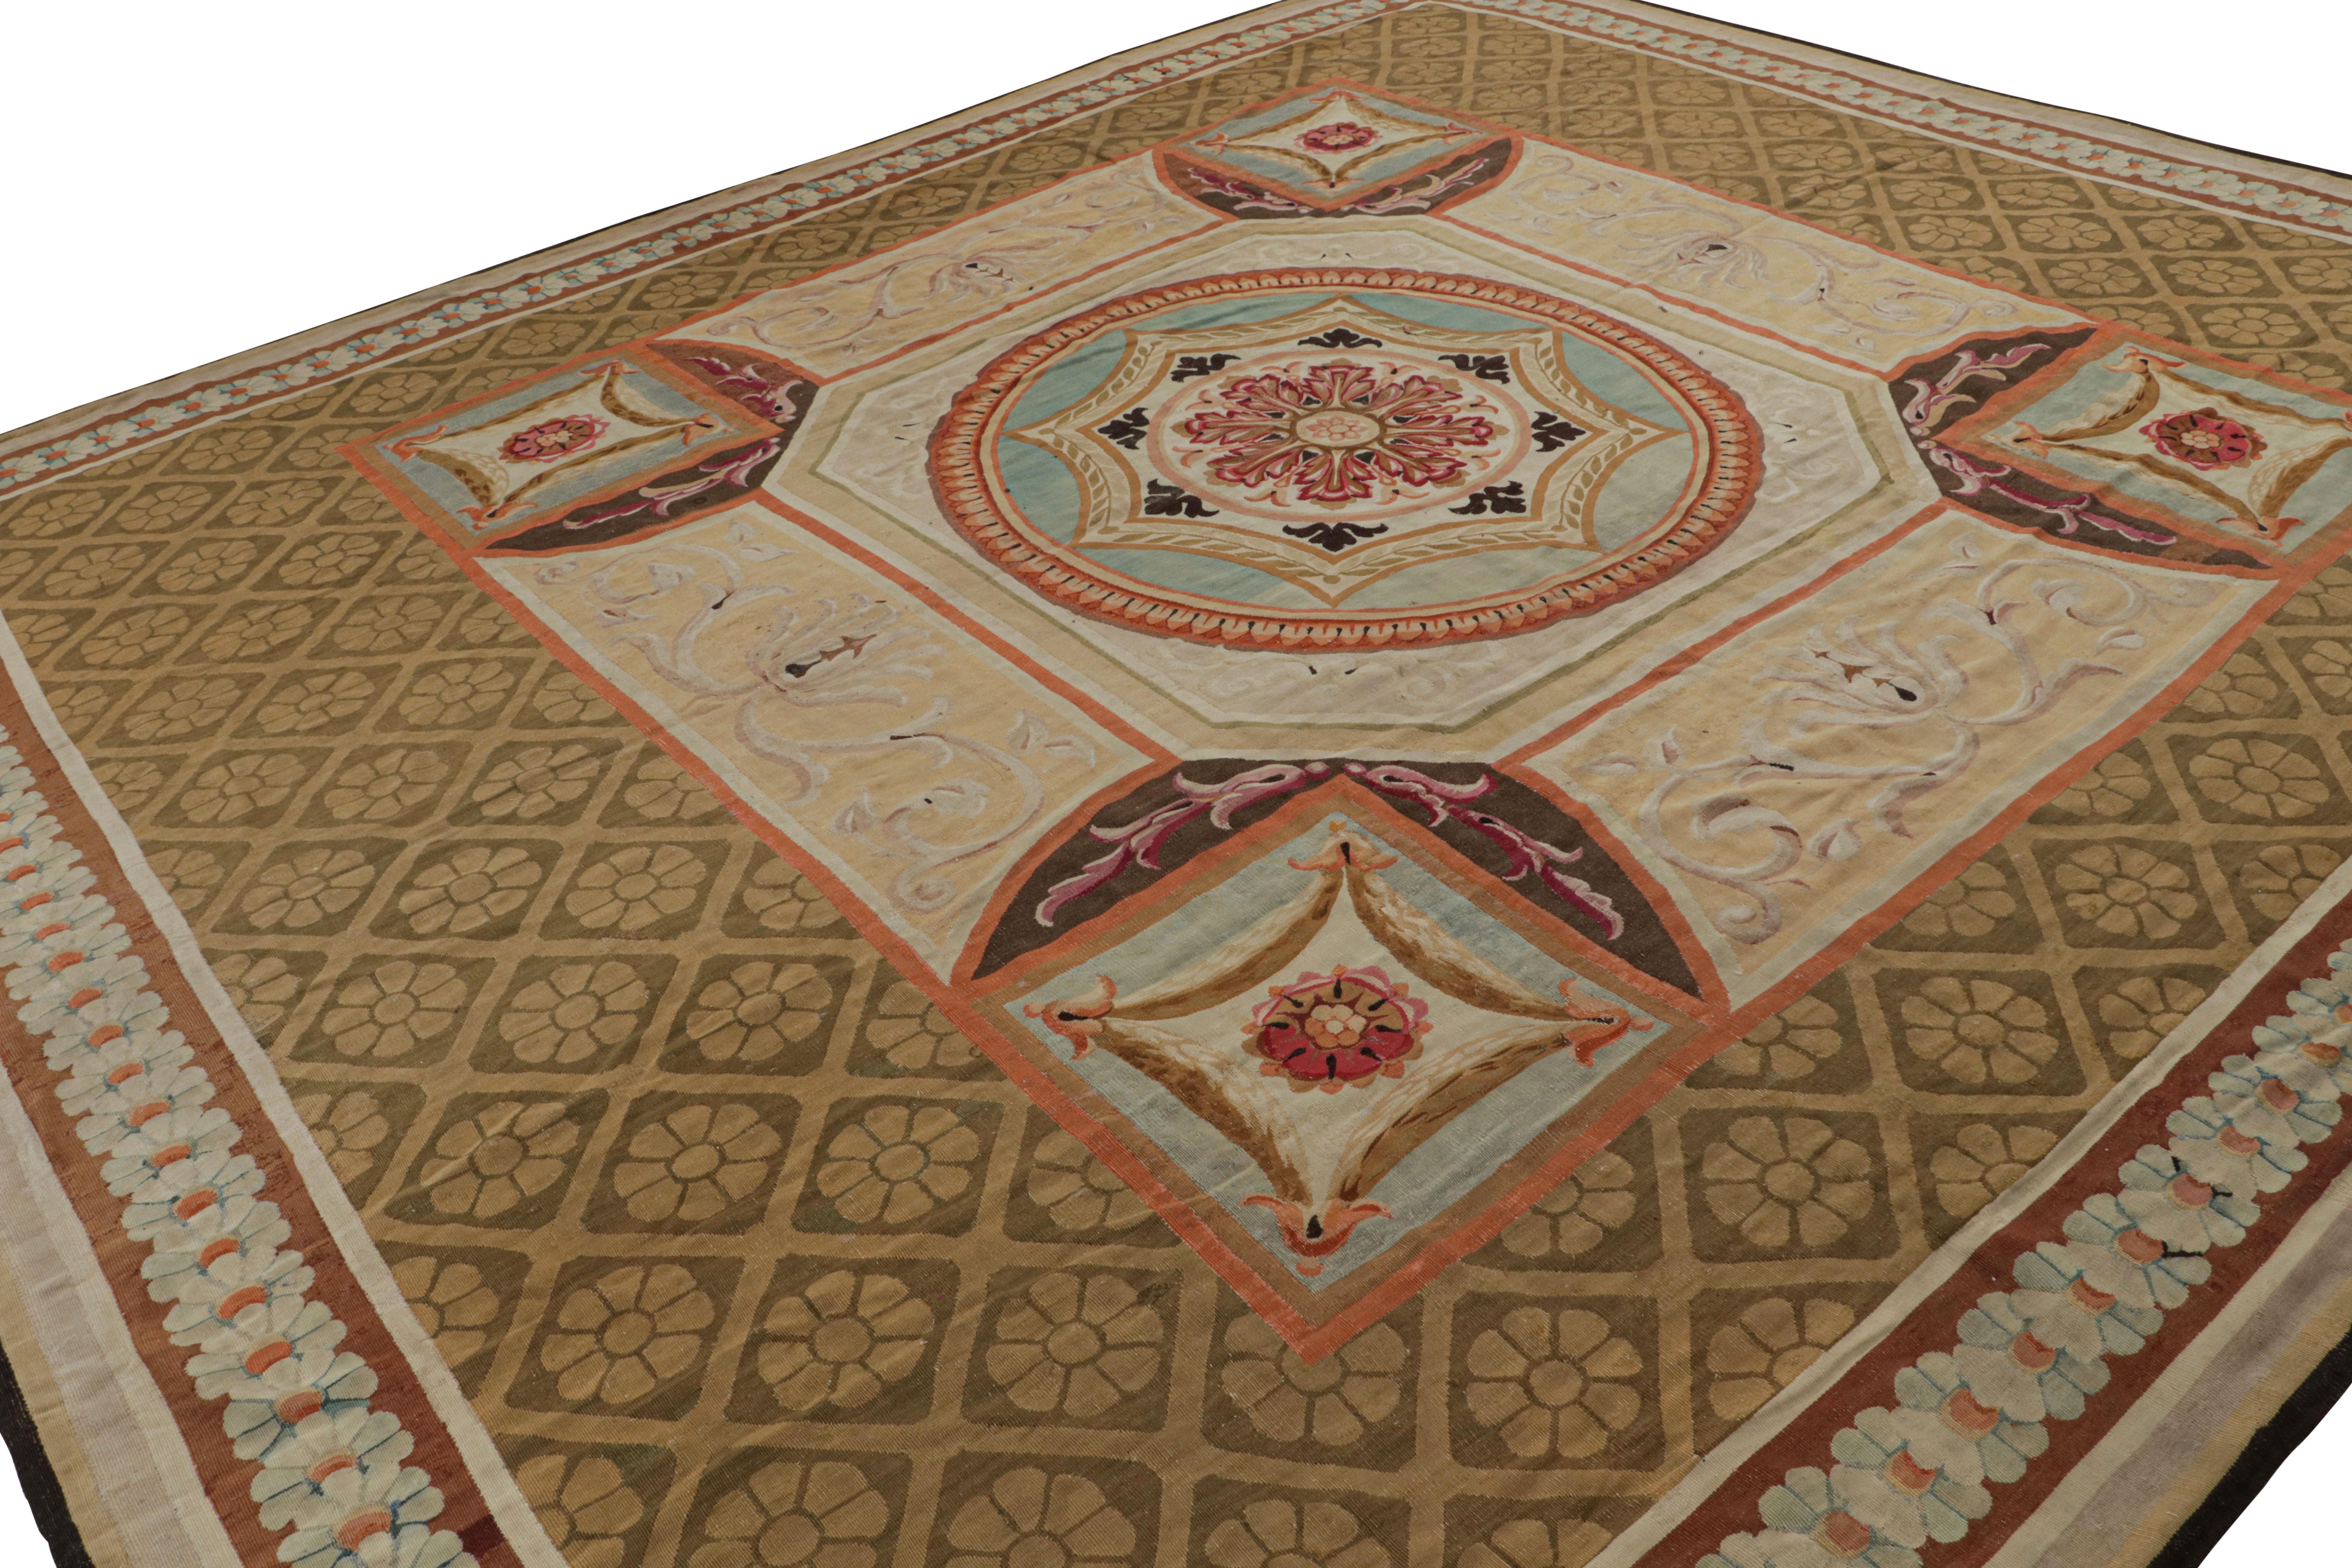 Handwoven in wool, this 12x14 French Antique Aubusson rug features a play of medallion and all over style with floral patterns particularly acanthus motifs, the curvaceous garlands in the stylistic details and a lattice underneath.  

On the design: